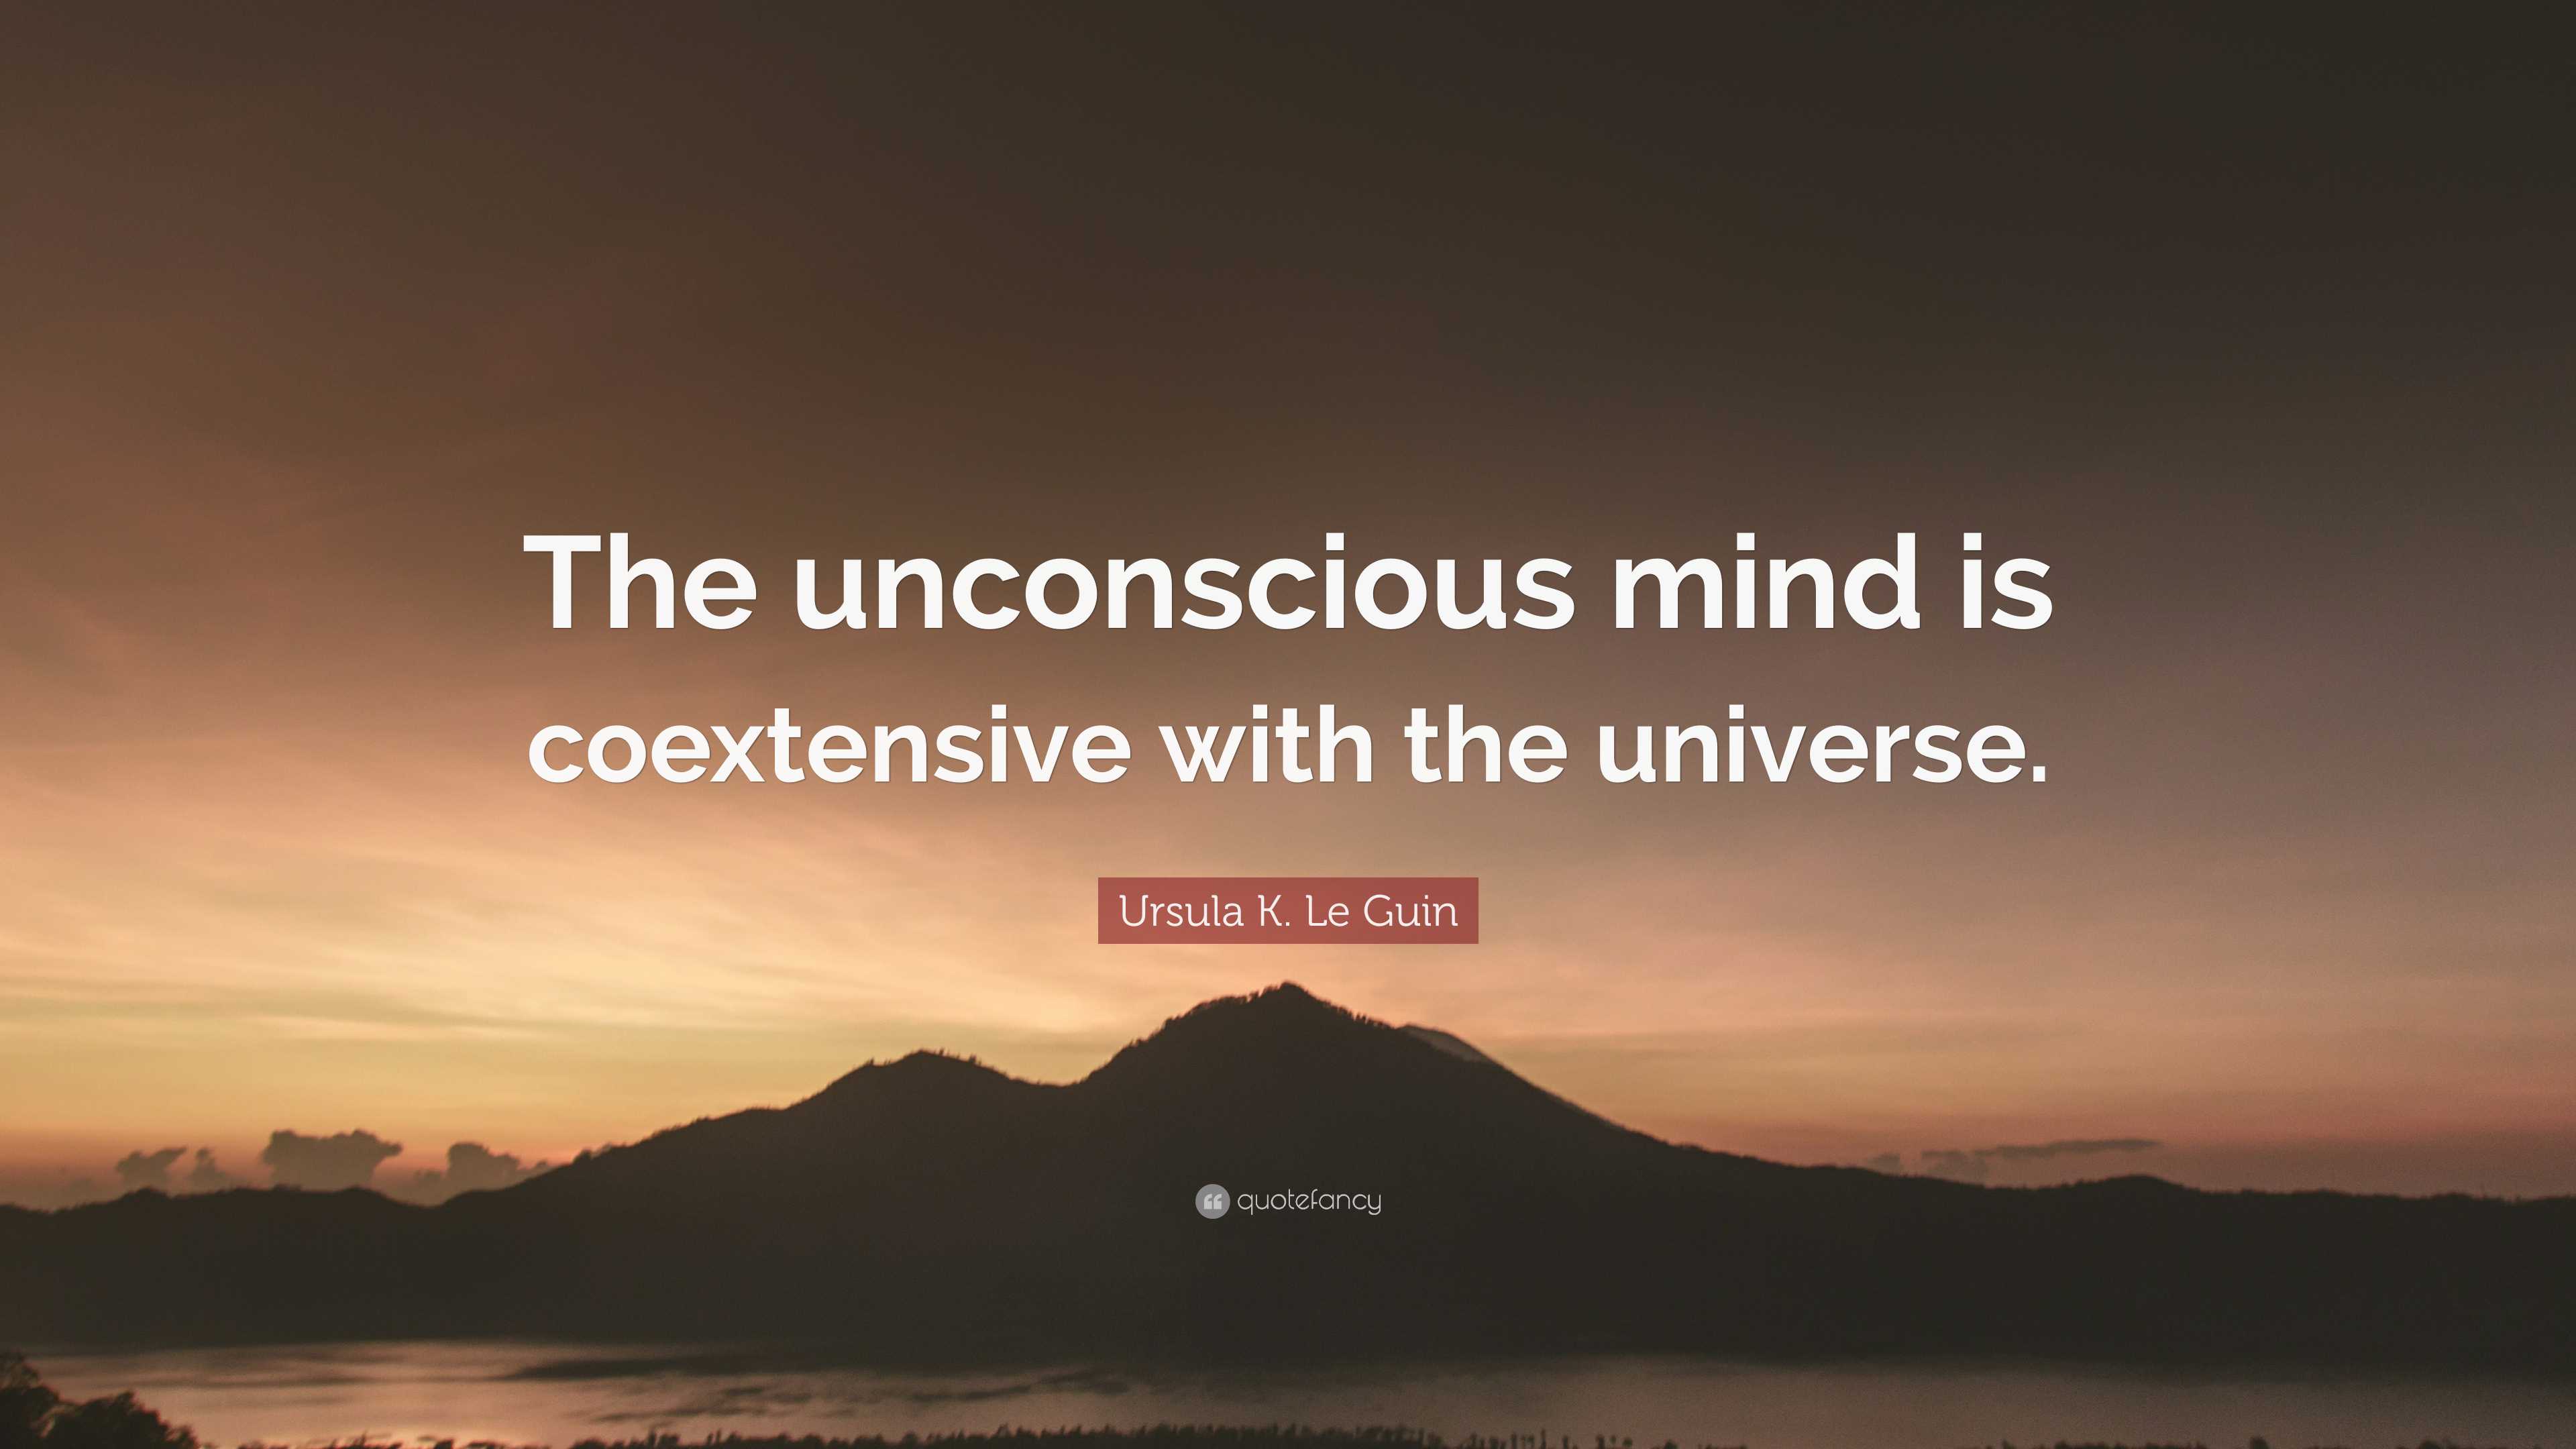 Ursula K. Le Guin Quote: “The unconscious mind is coextensive with the ...